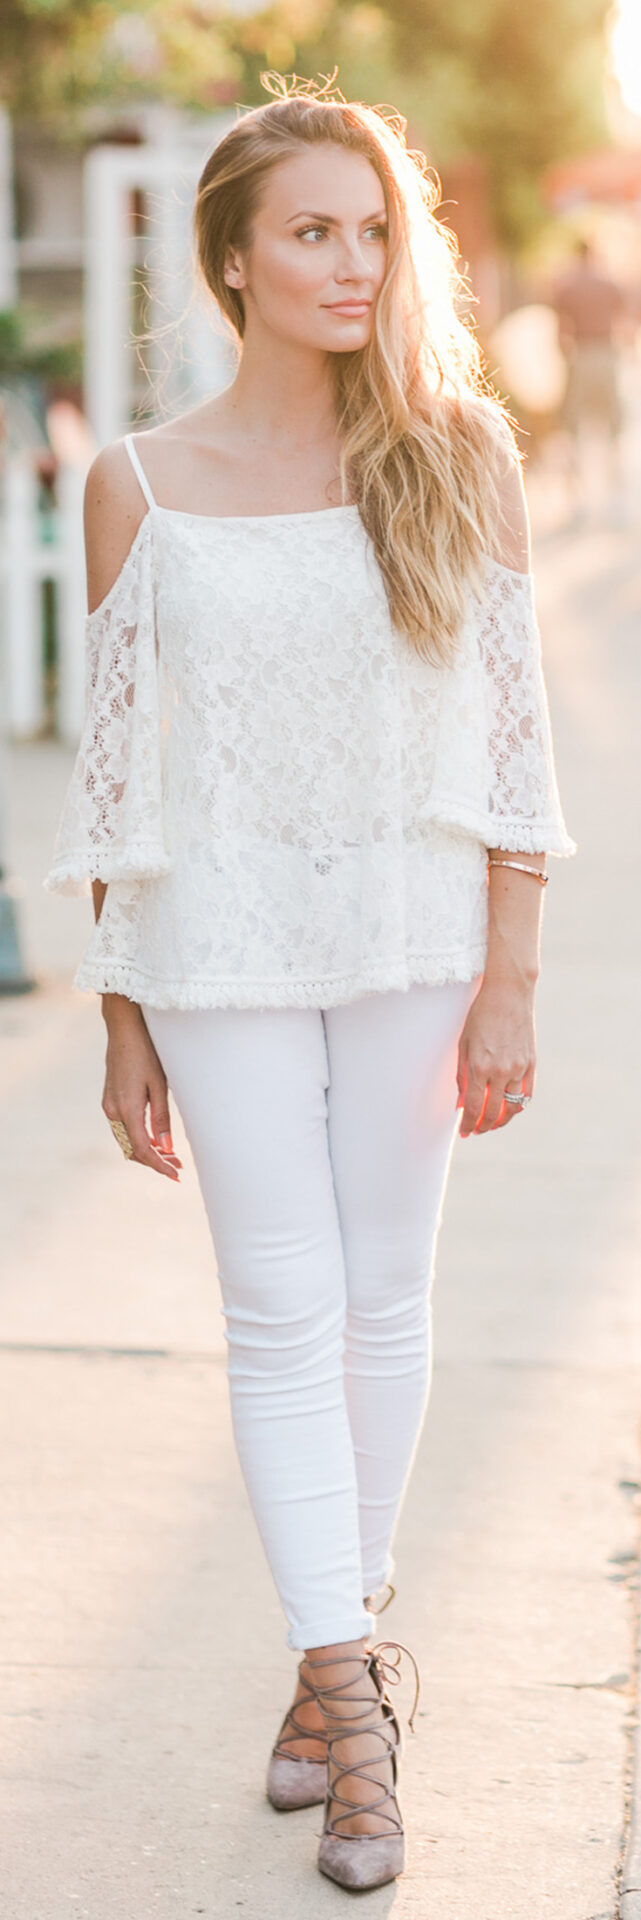 Angela Lanter - Hello Gorgeous Outfit: Cold Shoulder Top, Skinny Jeans, Heels, Necklace, Ring and Bracelet.